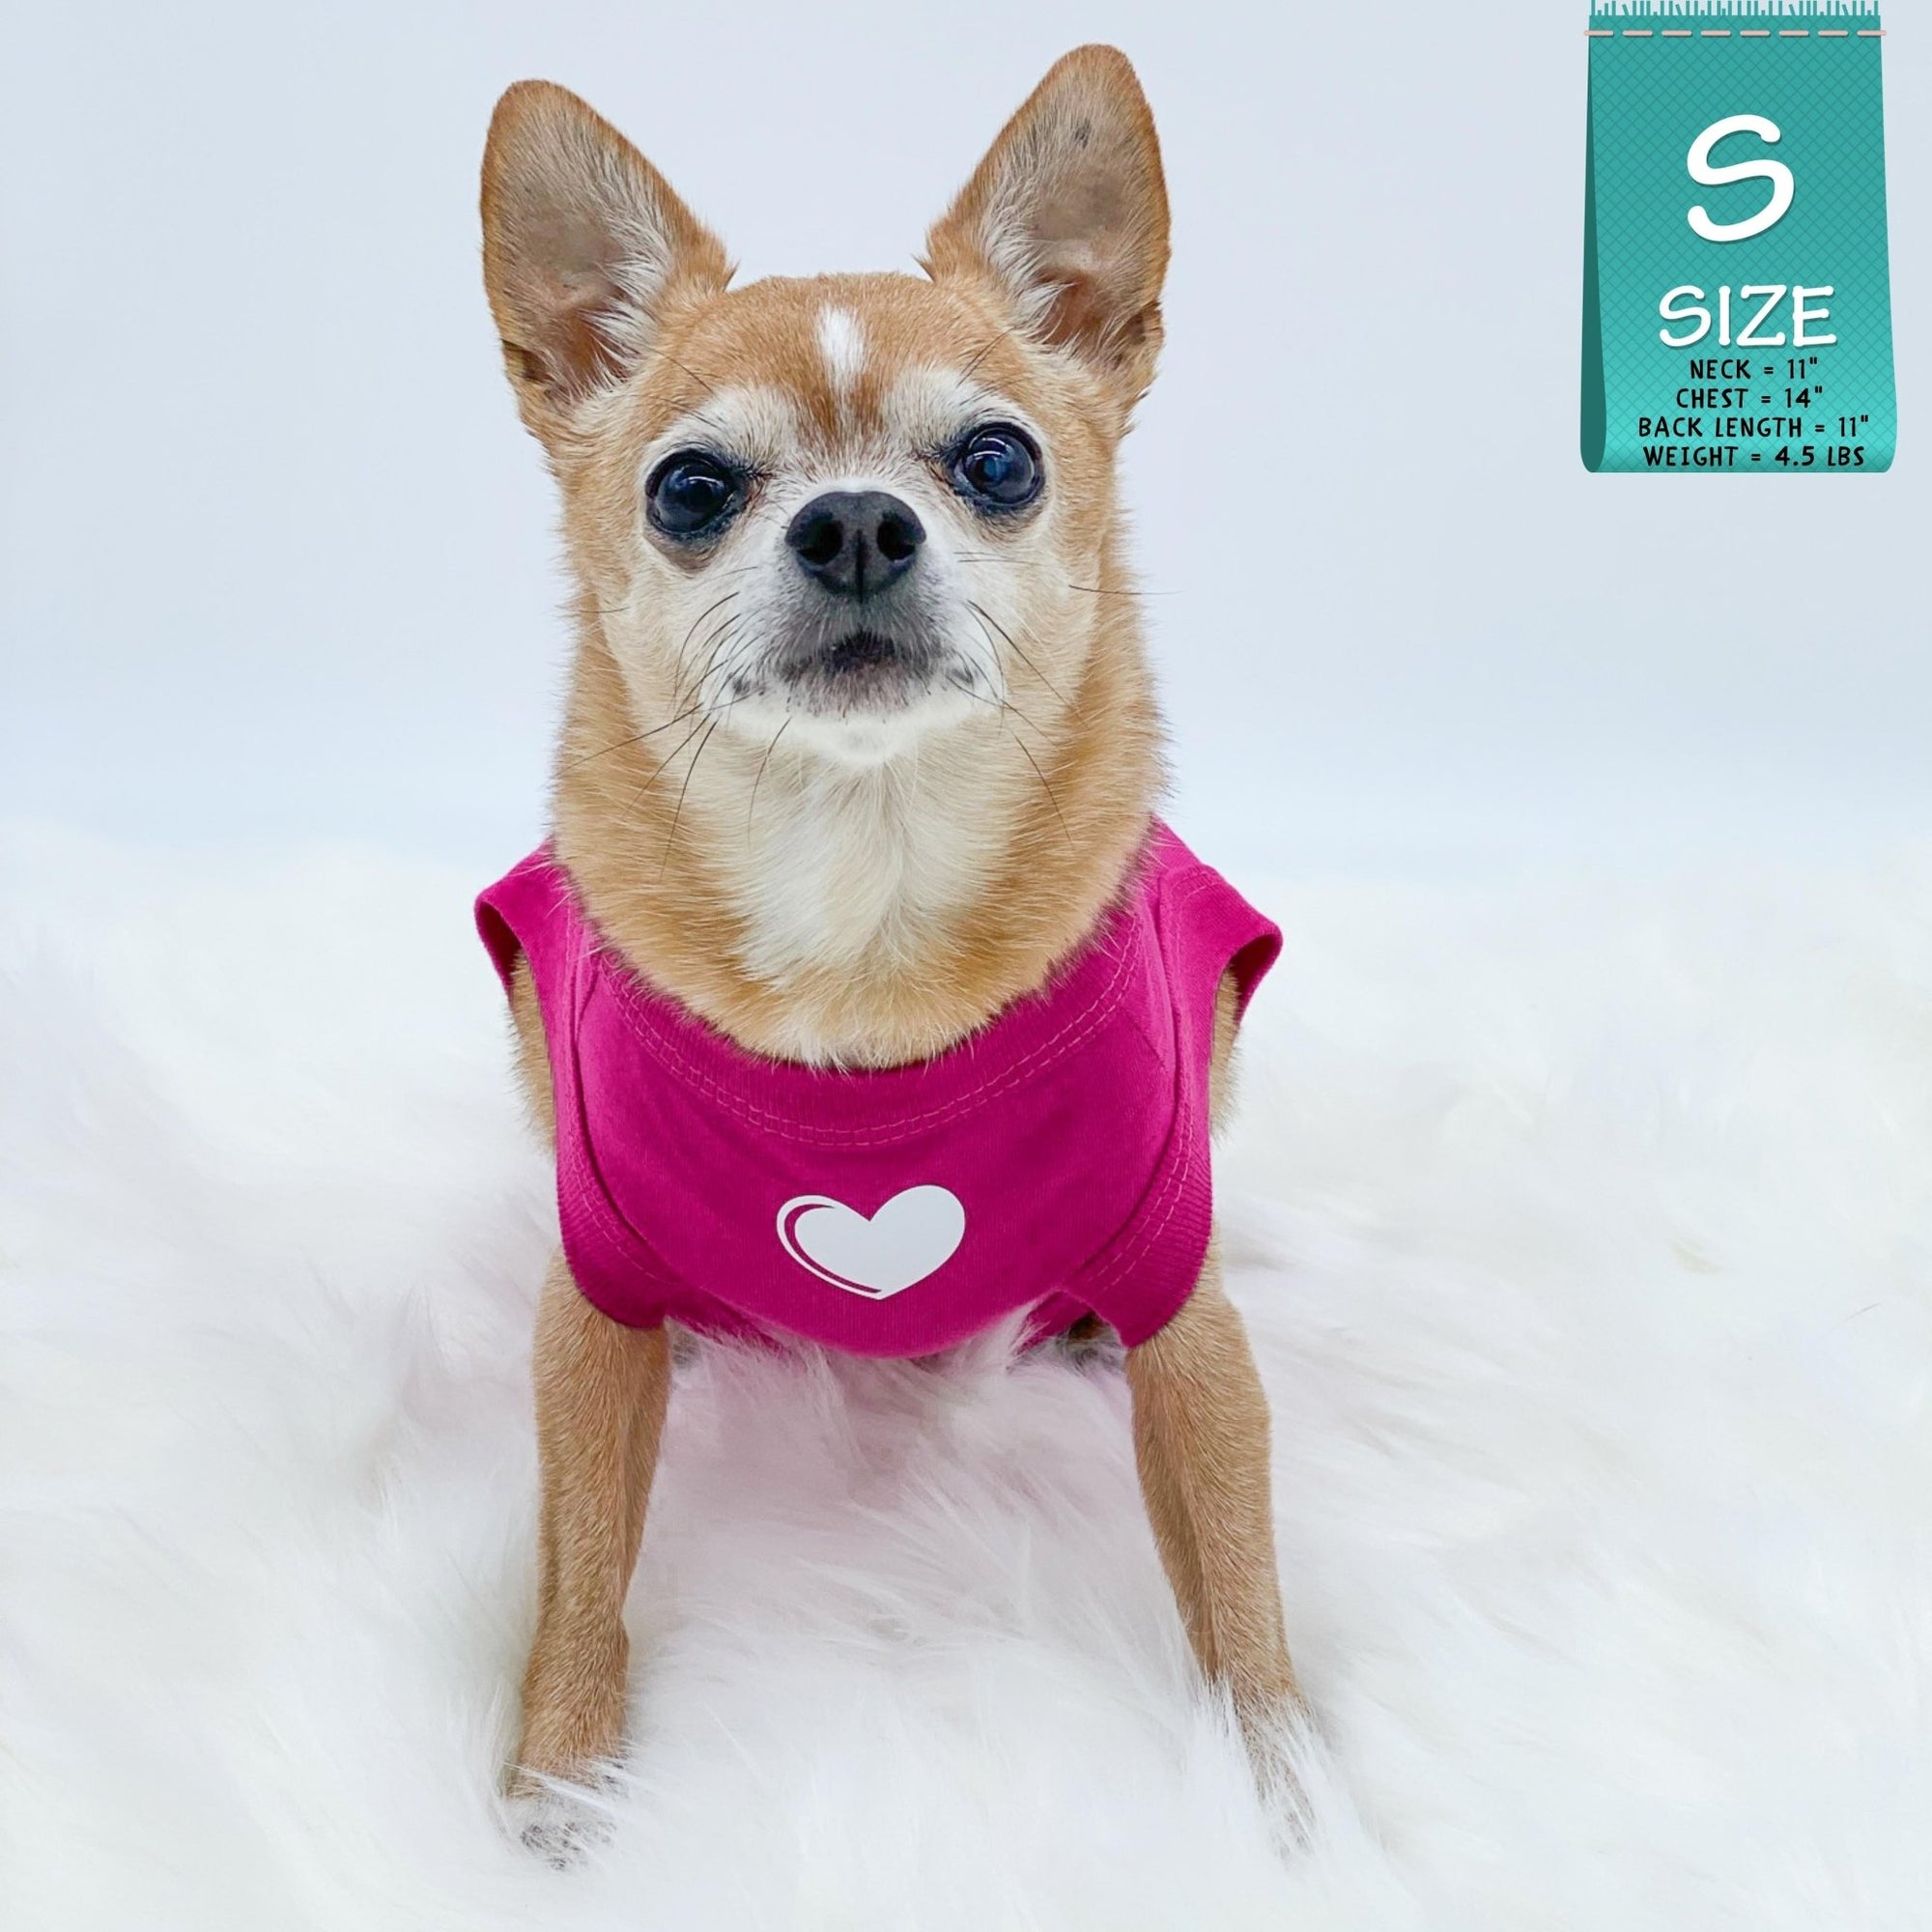 Dog T-Shirt - Chihuahua wearing &quot;Spoiled&quot; dog t-shirt in hot pink with a solid white heart emoji on chest - against solid white background - Wag Trendz